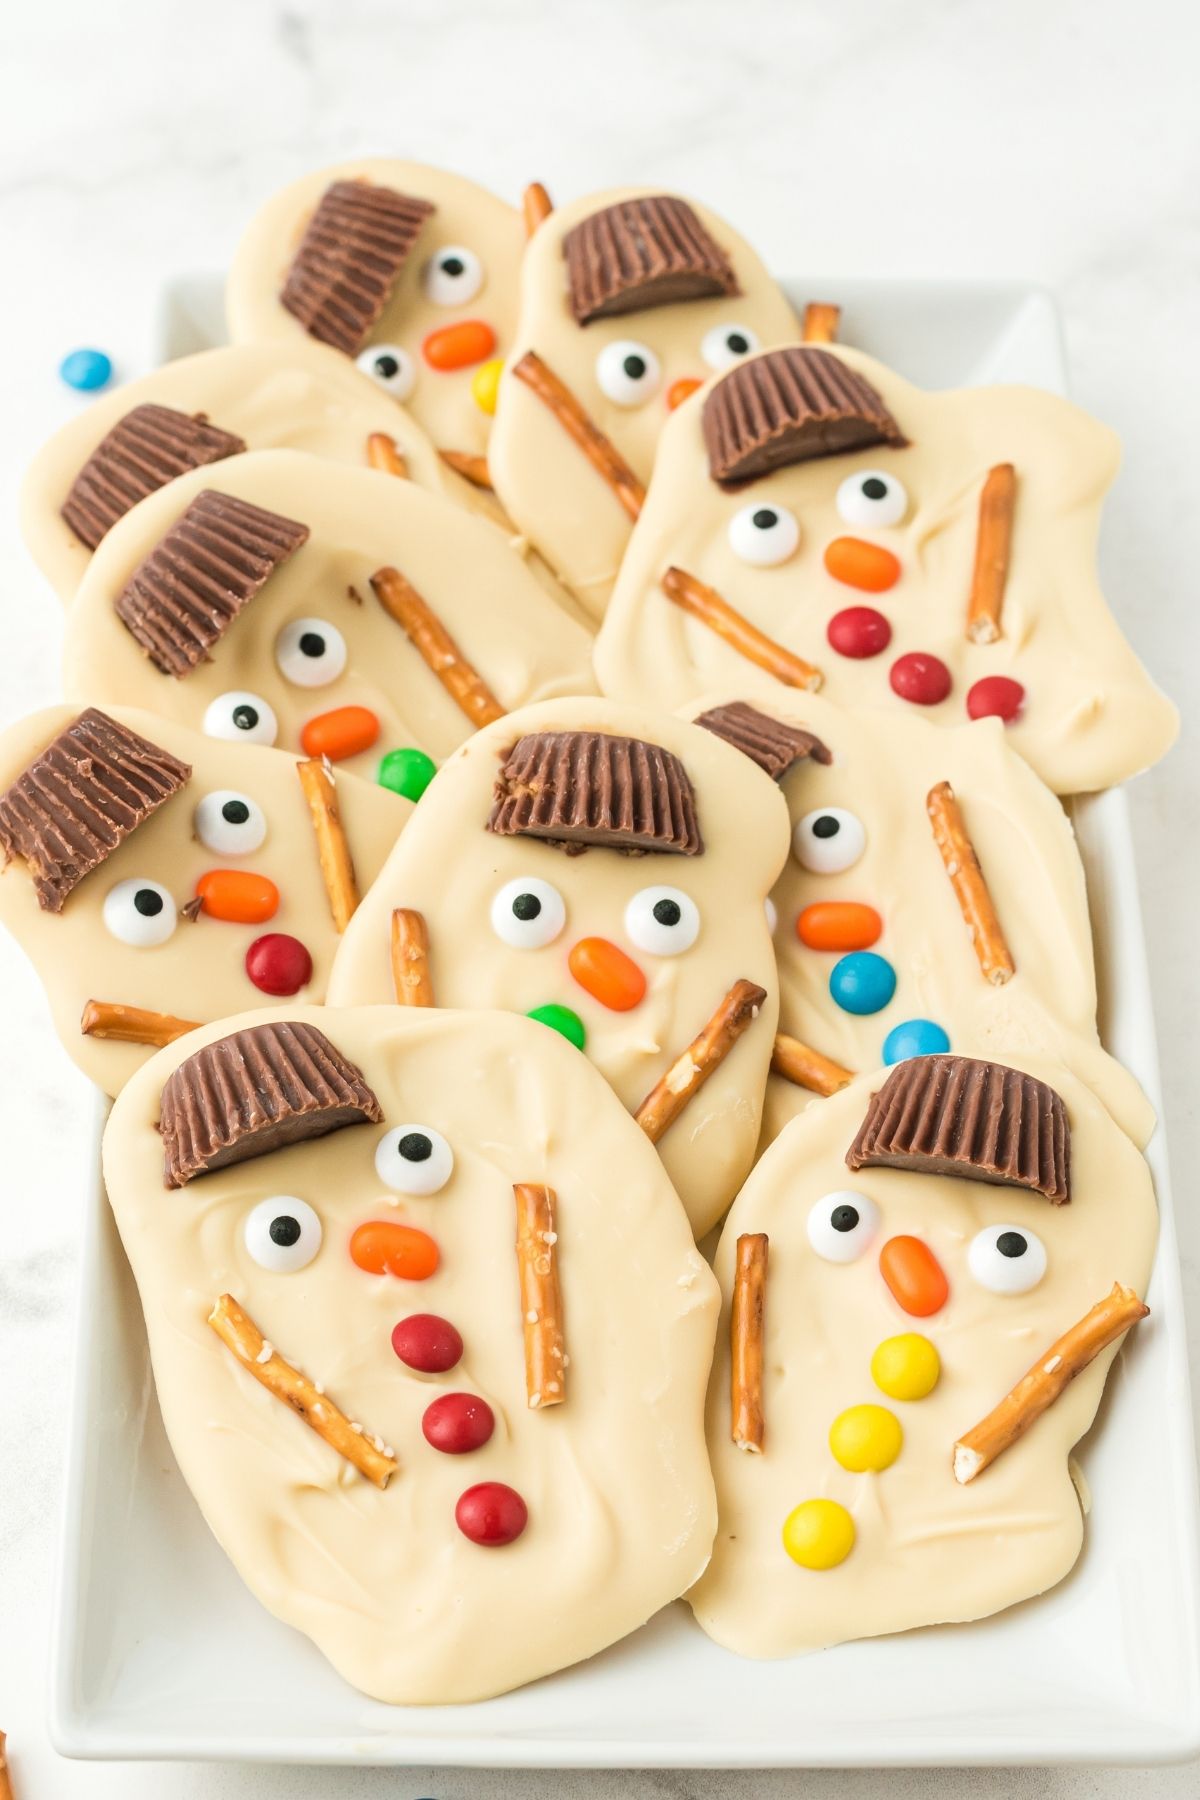 white chocolate bark with pretzel sticks, and sprinkles that look like a melted snowman